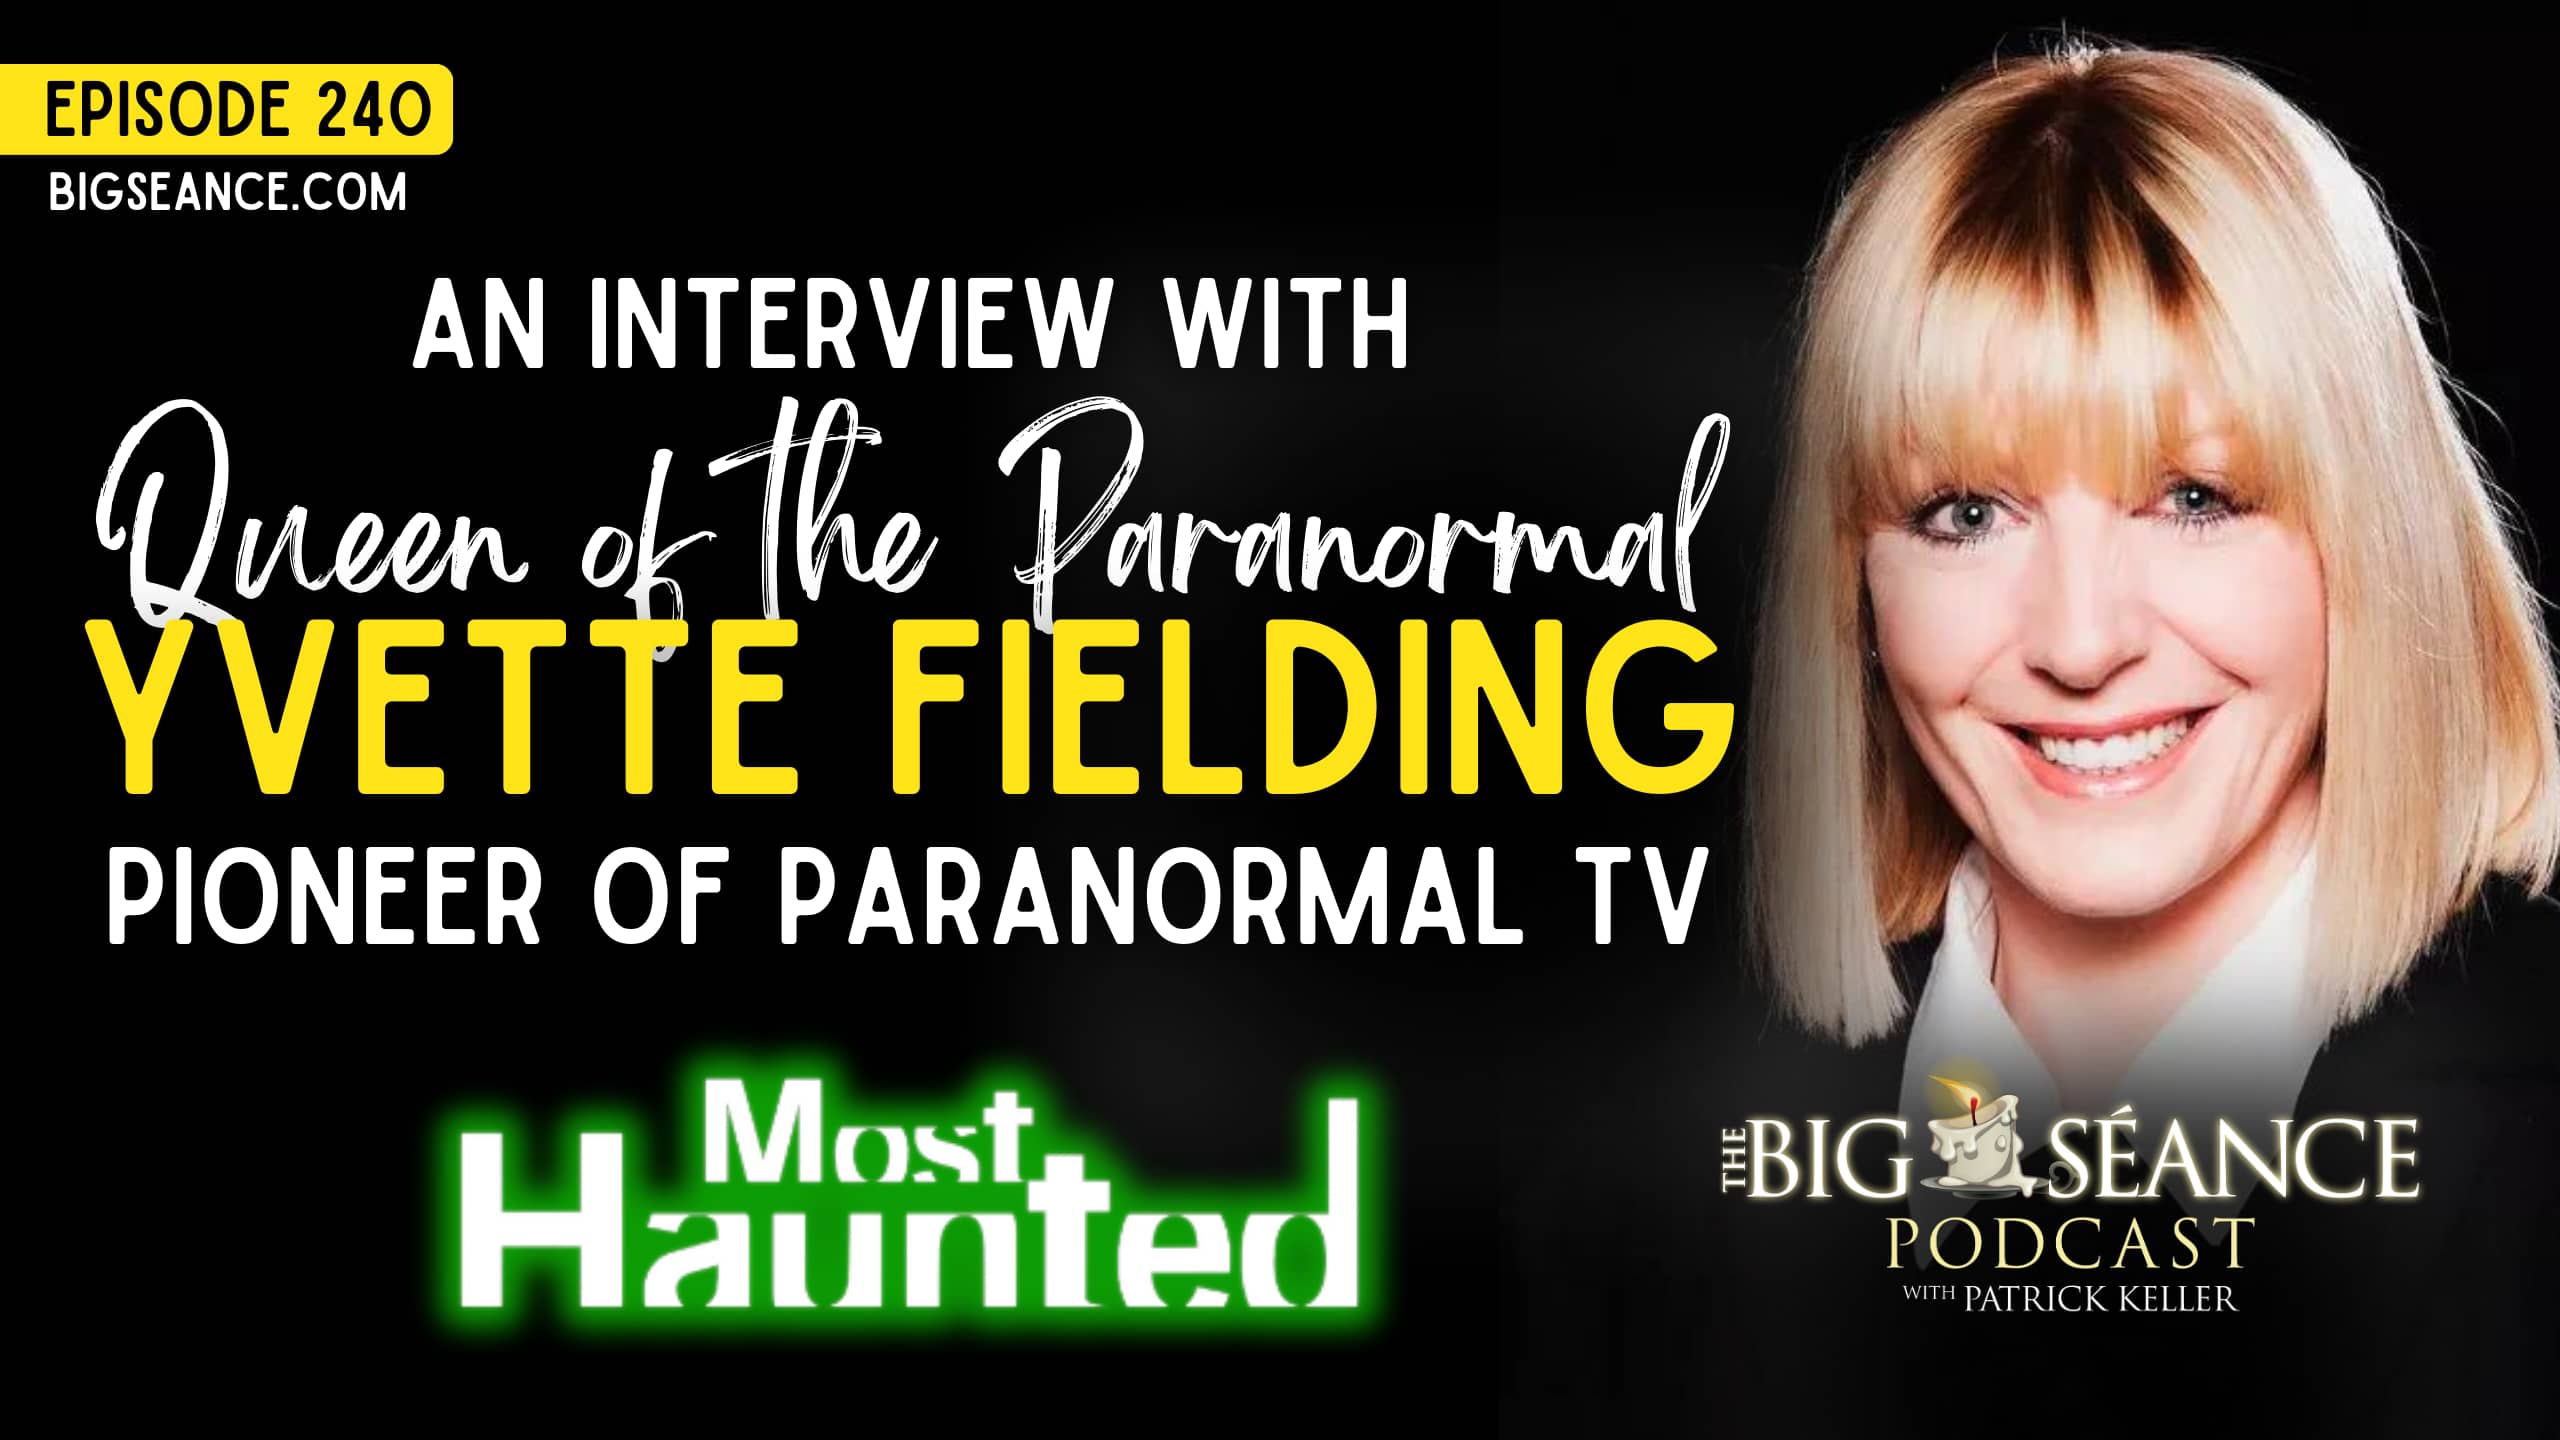 SPECIAL EVENT: An Interview with Yvette Fielding, Most Haunted, with Patrick Keller of The Big Seance Podcast